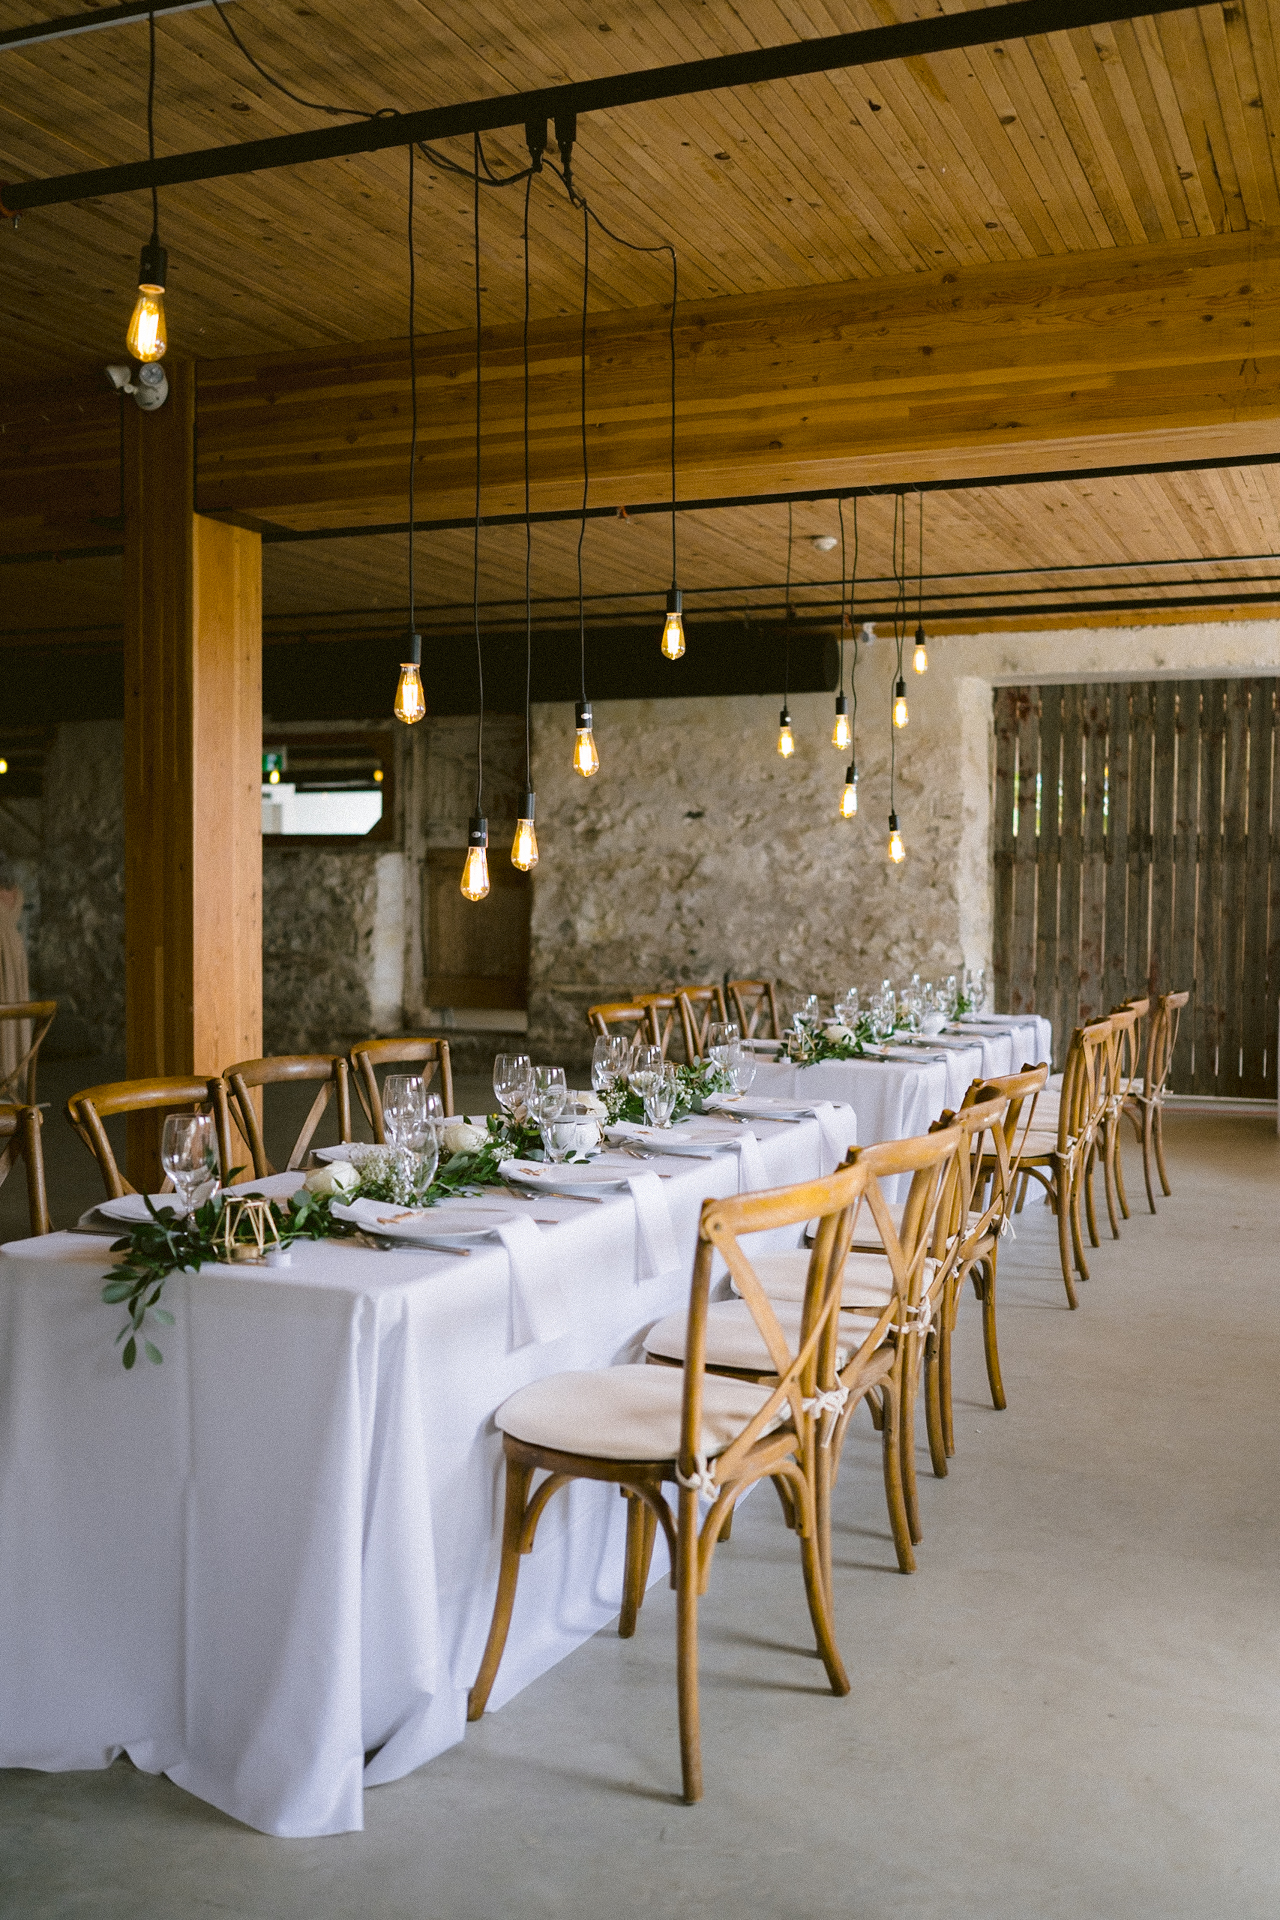 An elegantly set banquet table with floral centerpieces and string lights at The Byre, Cambium Farms.